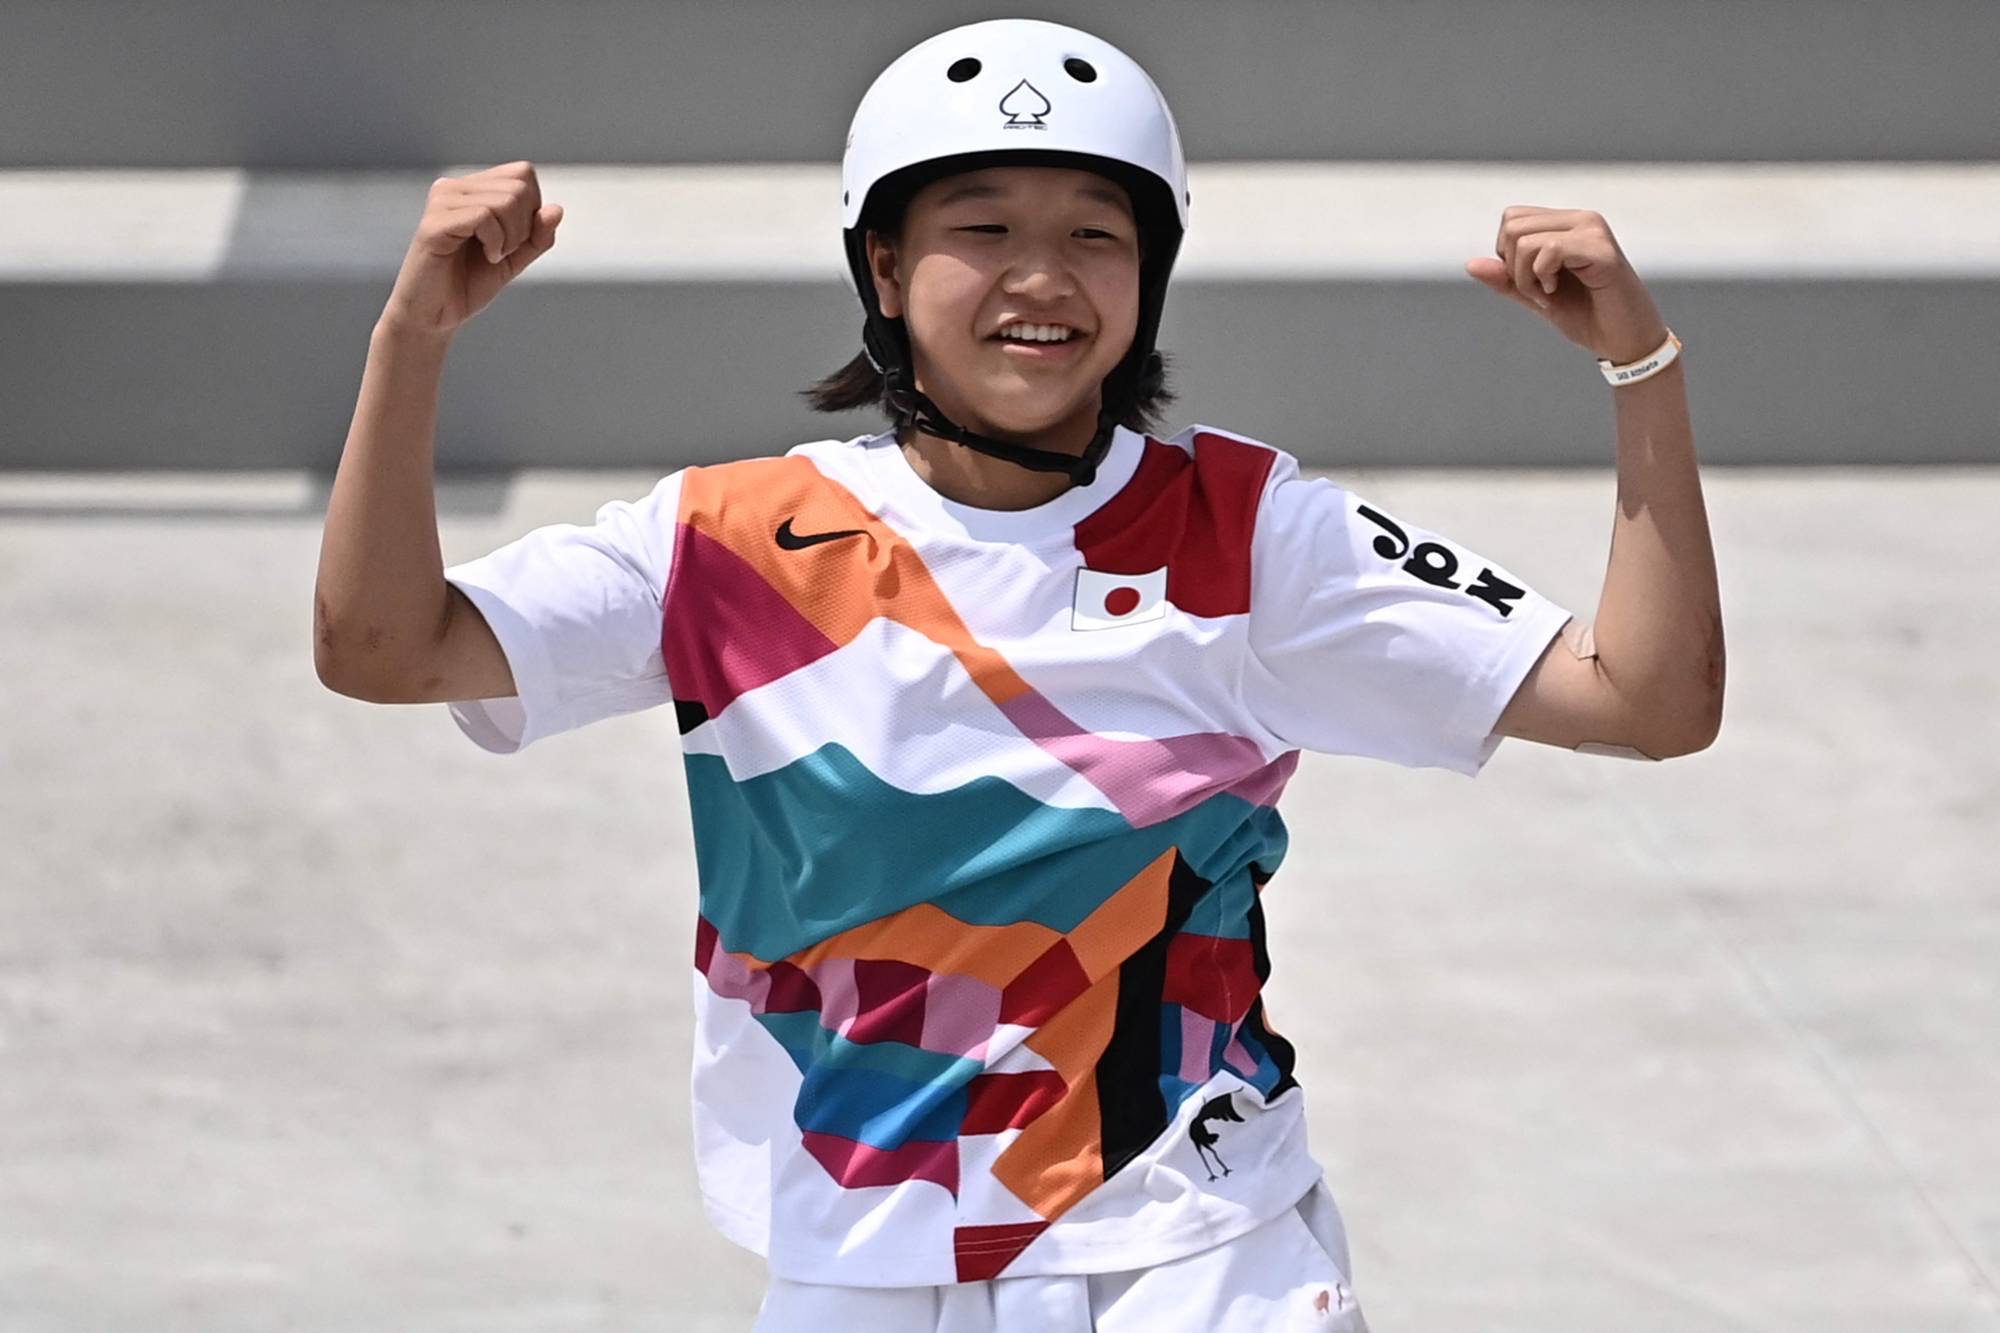 Japan’s Momiji Nishiya celebrates after performing a trick during the skateboarding women’s street final in Tokyo on Monday. The 13-year-old took gold in the competition. | AFP-JIJI